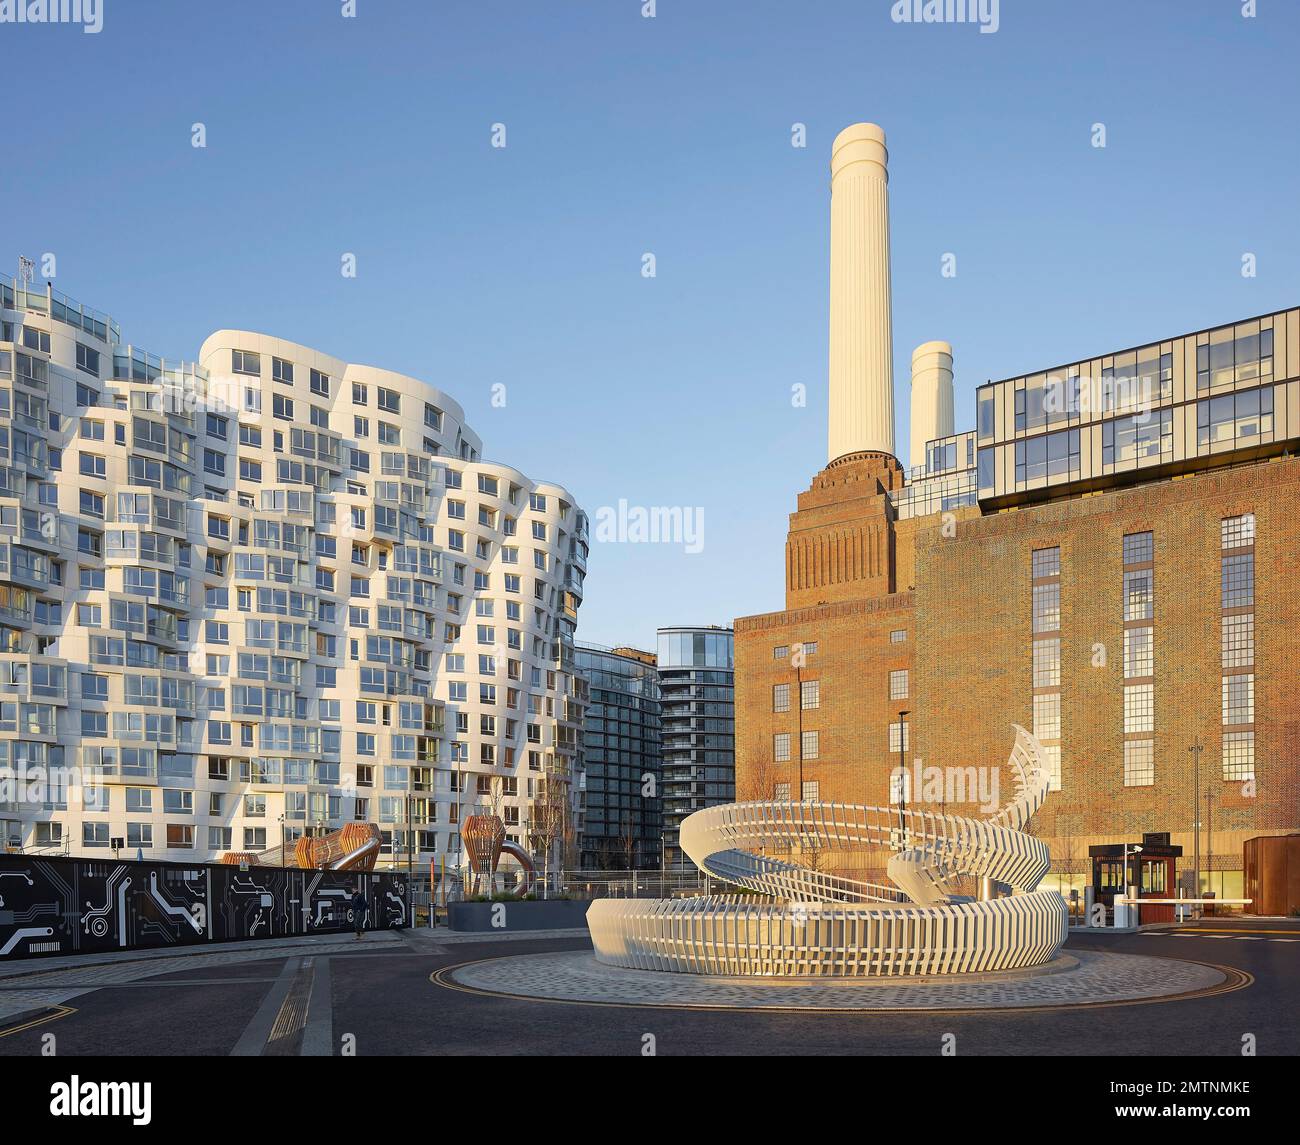 Prospect Place in juxtaposition to iconic Battersea Power Station building. Prospect Place Battersea Power Station Frank Gehry, London, United Kingdom Stock Photo